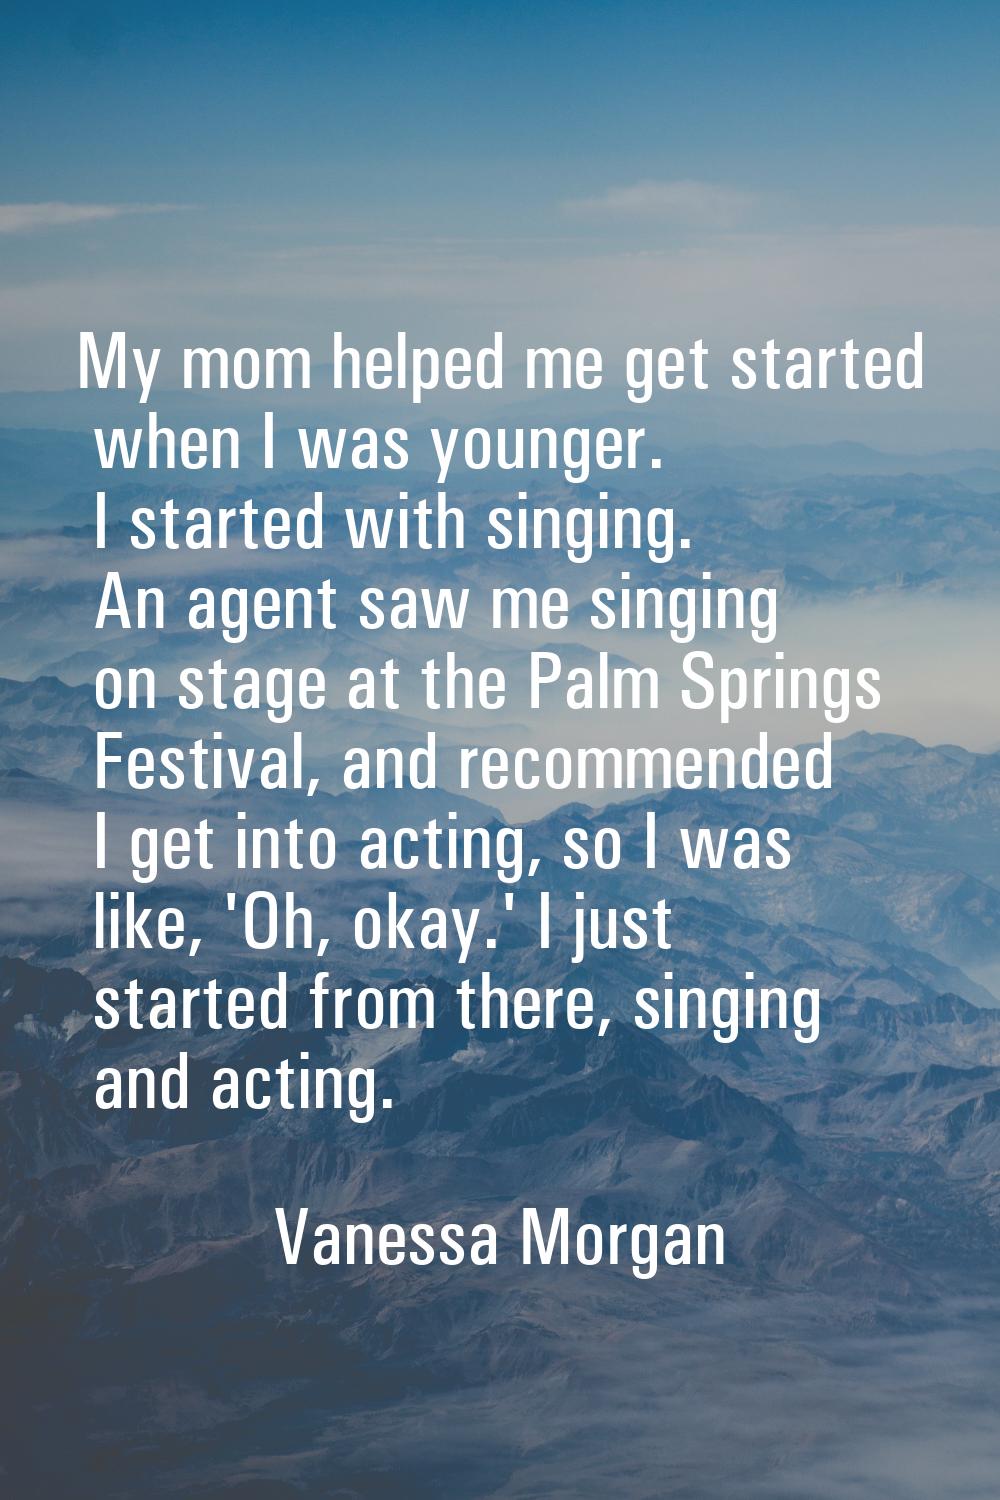 My mom helped me get started when I was younger. I started with singing. An agent saw me singing on